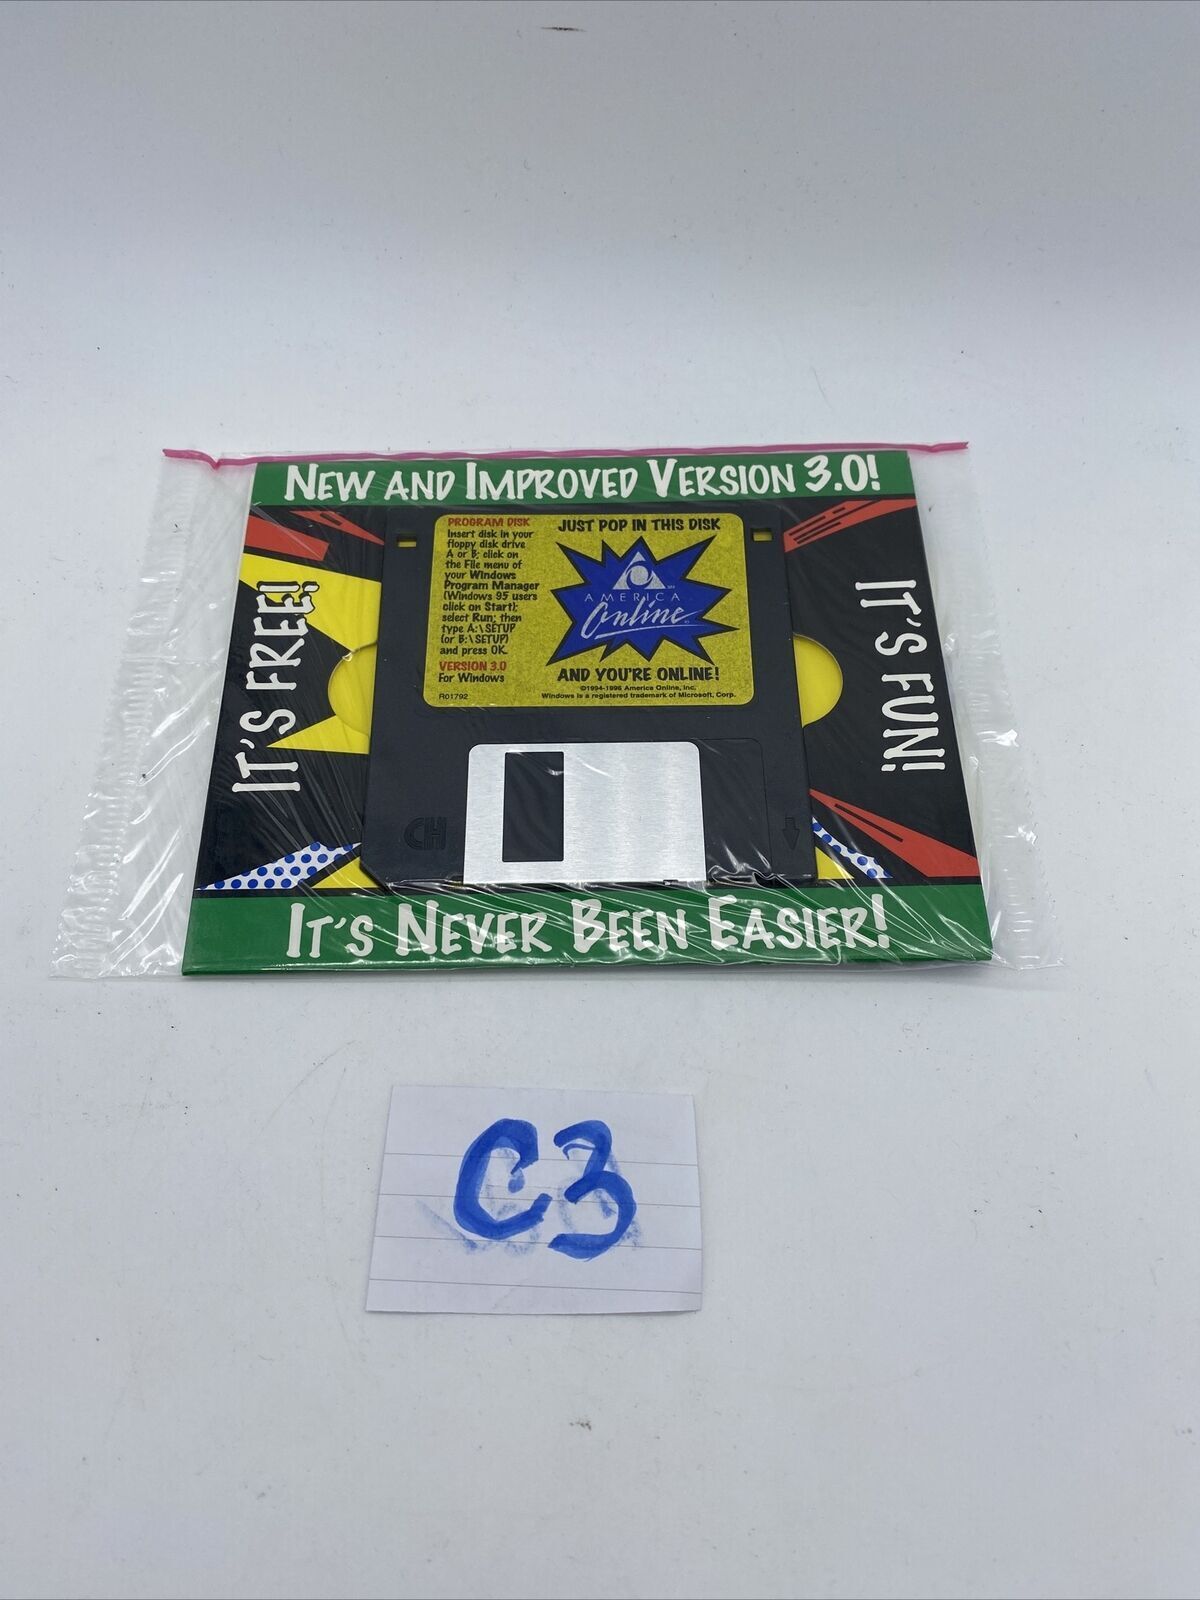 NOS 1998 America Online Version 3.0 Floppy Disc 15 Free Hours NEW SEALED